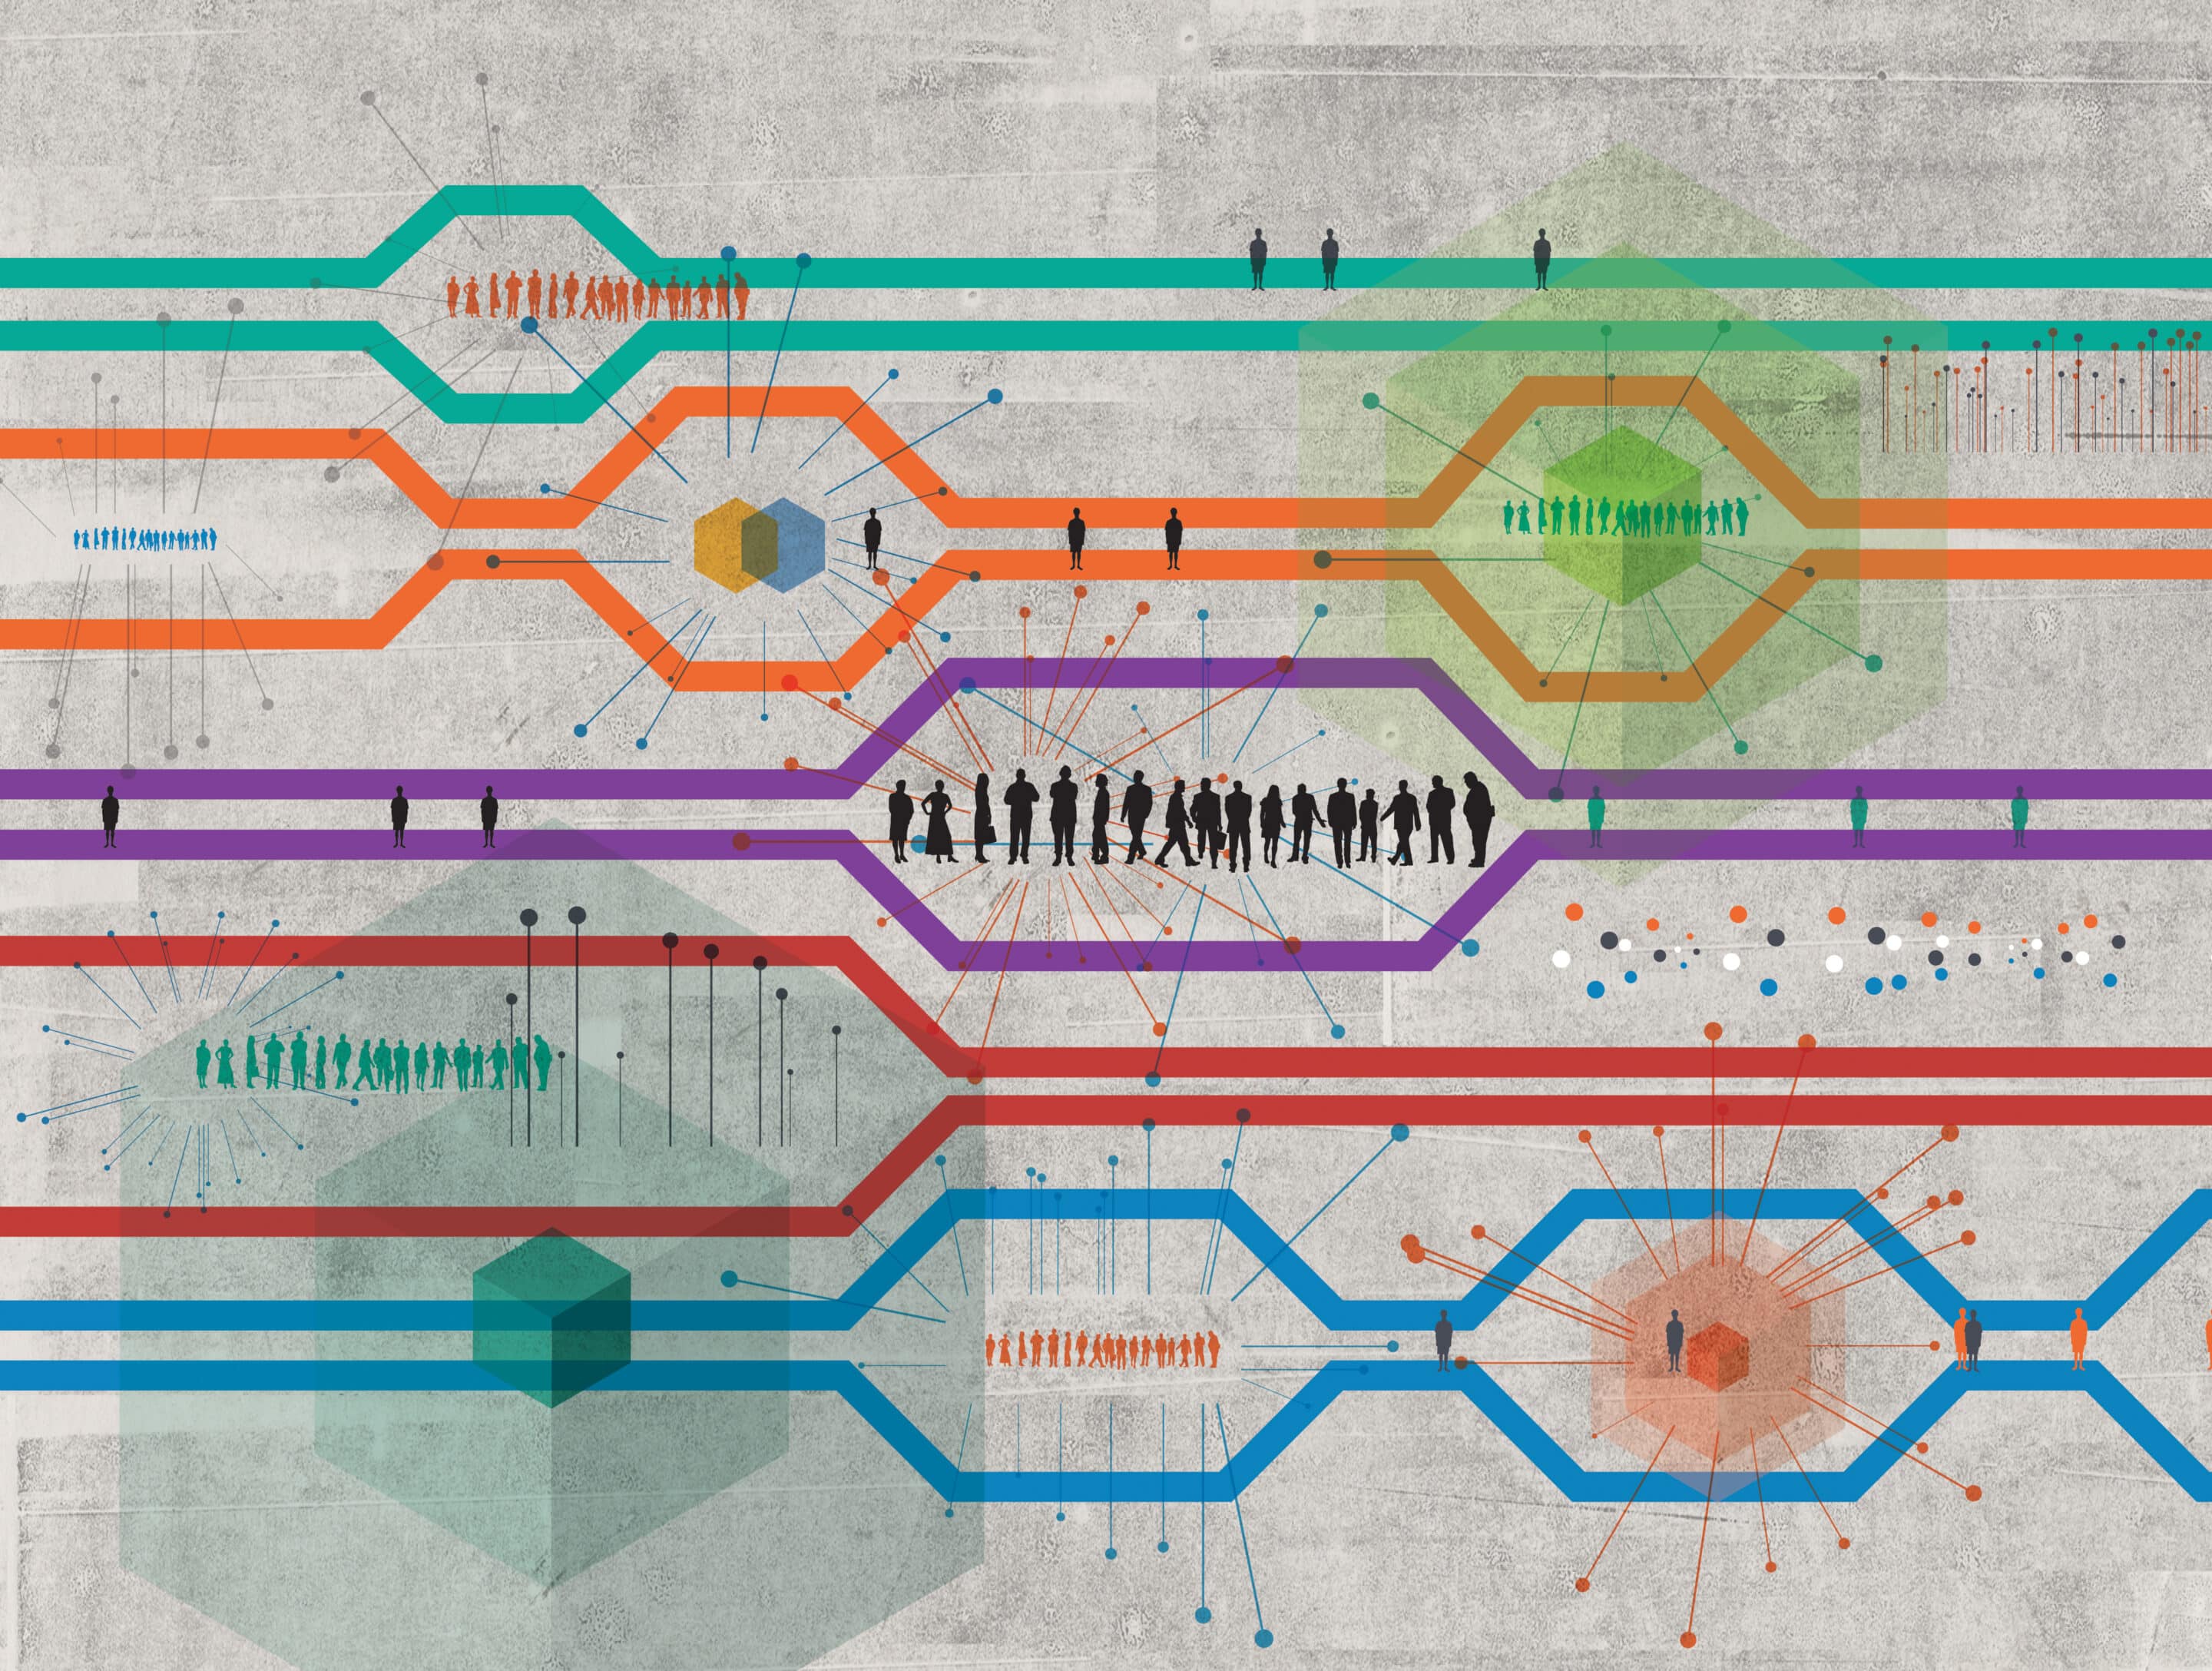 Colorful illustration depicting “a growing pipeline”